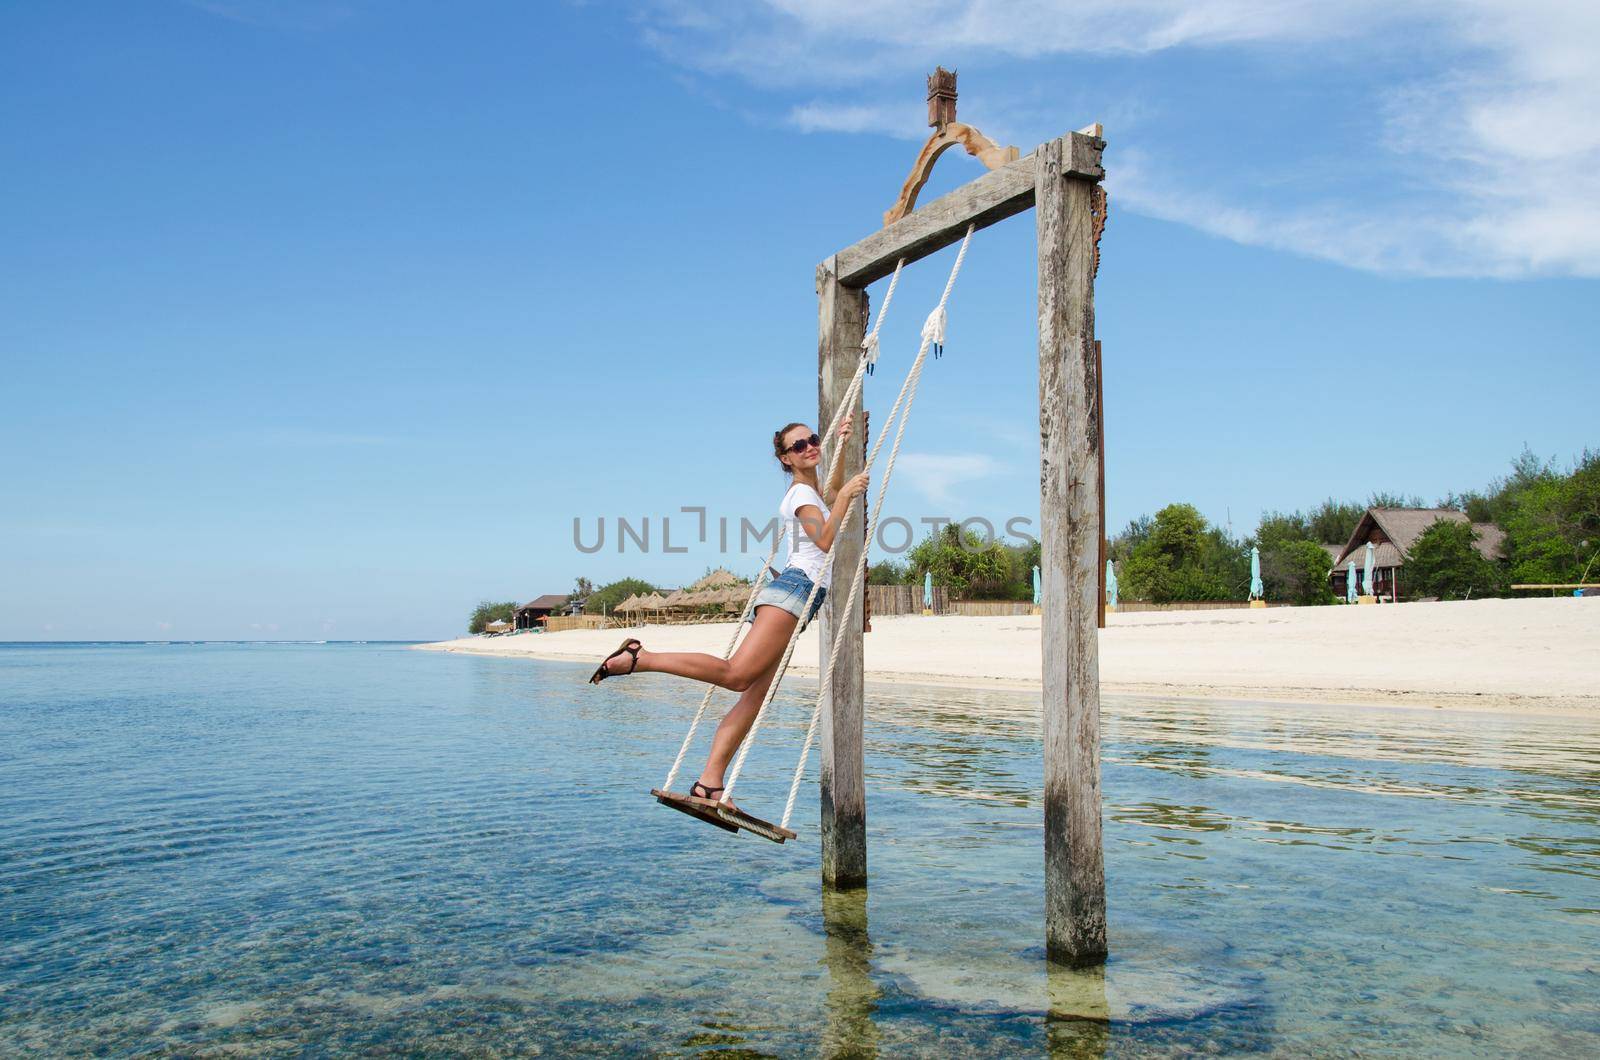 Bali, Indonesia. On the beach a young beautiful girl riding on a swing in the ocean. Stock Image